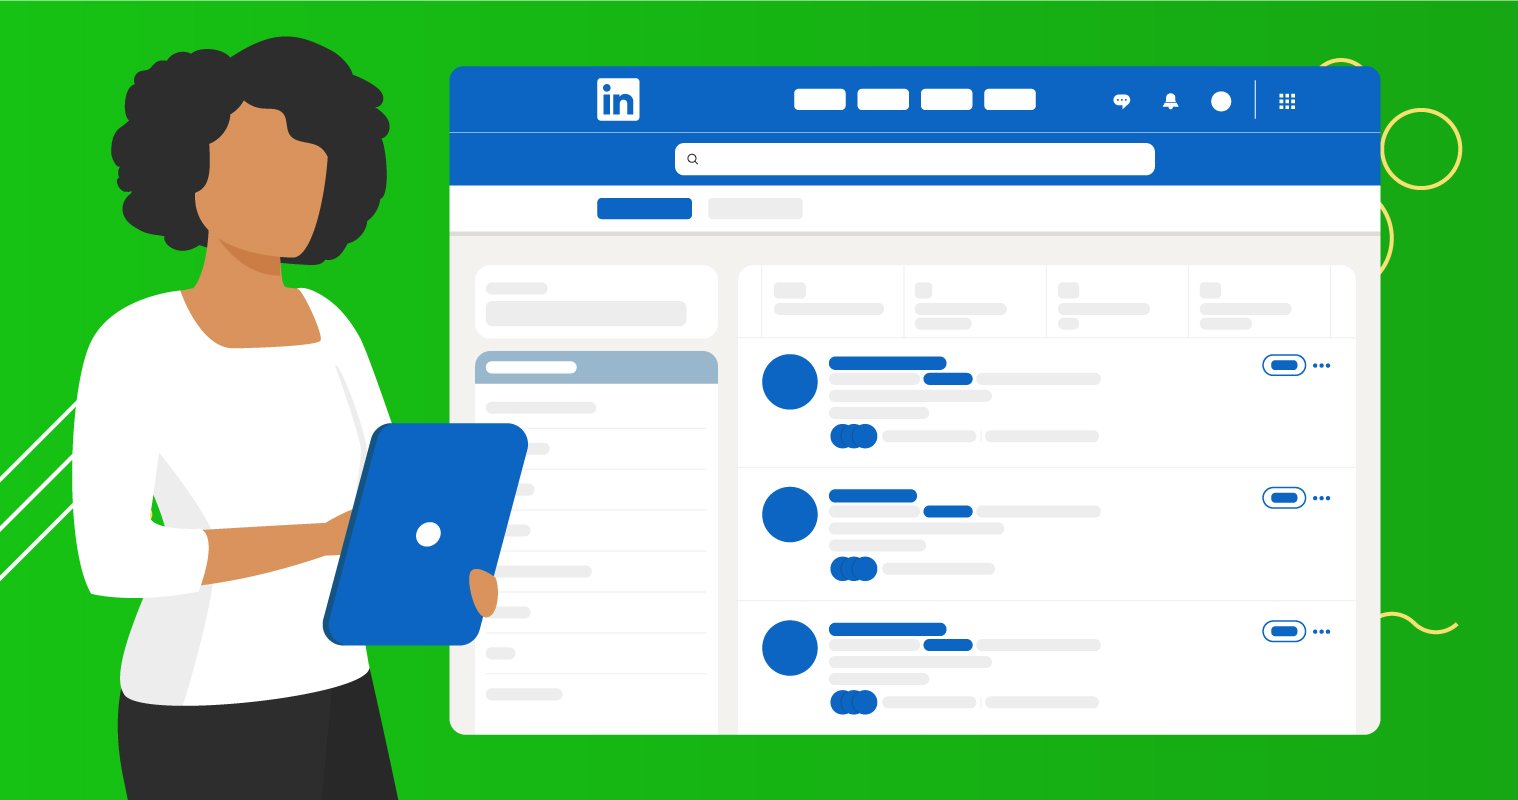 How to Use LinkedIn for Business: 13 Powerful Tips